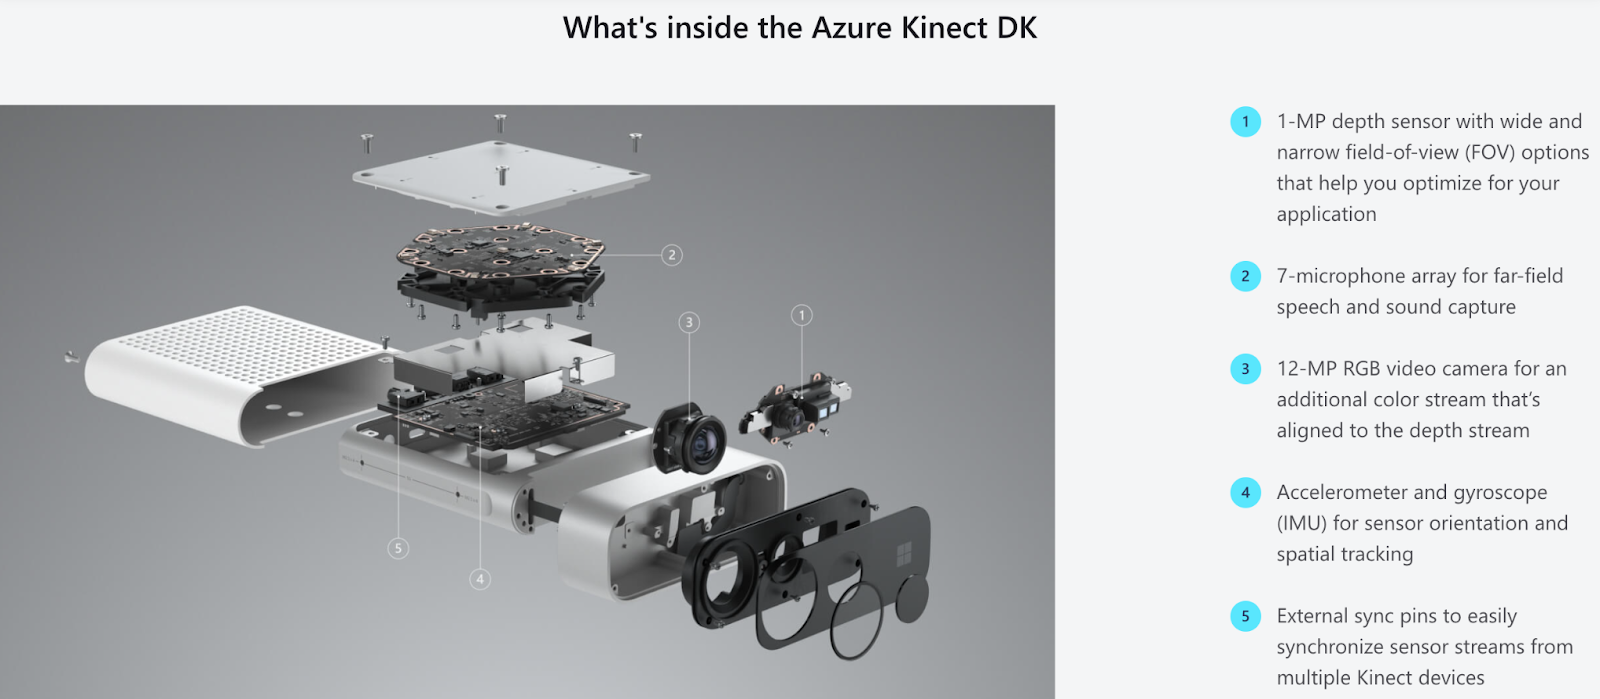 The Azure Kinect DK comes with a 7 microphone array to pick up voices